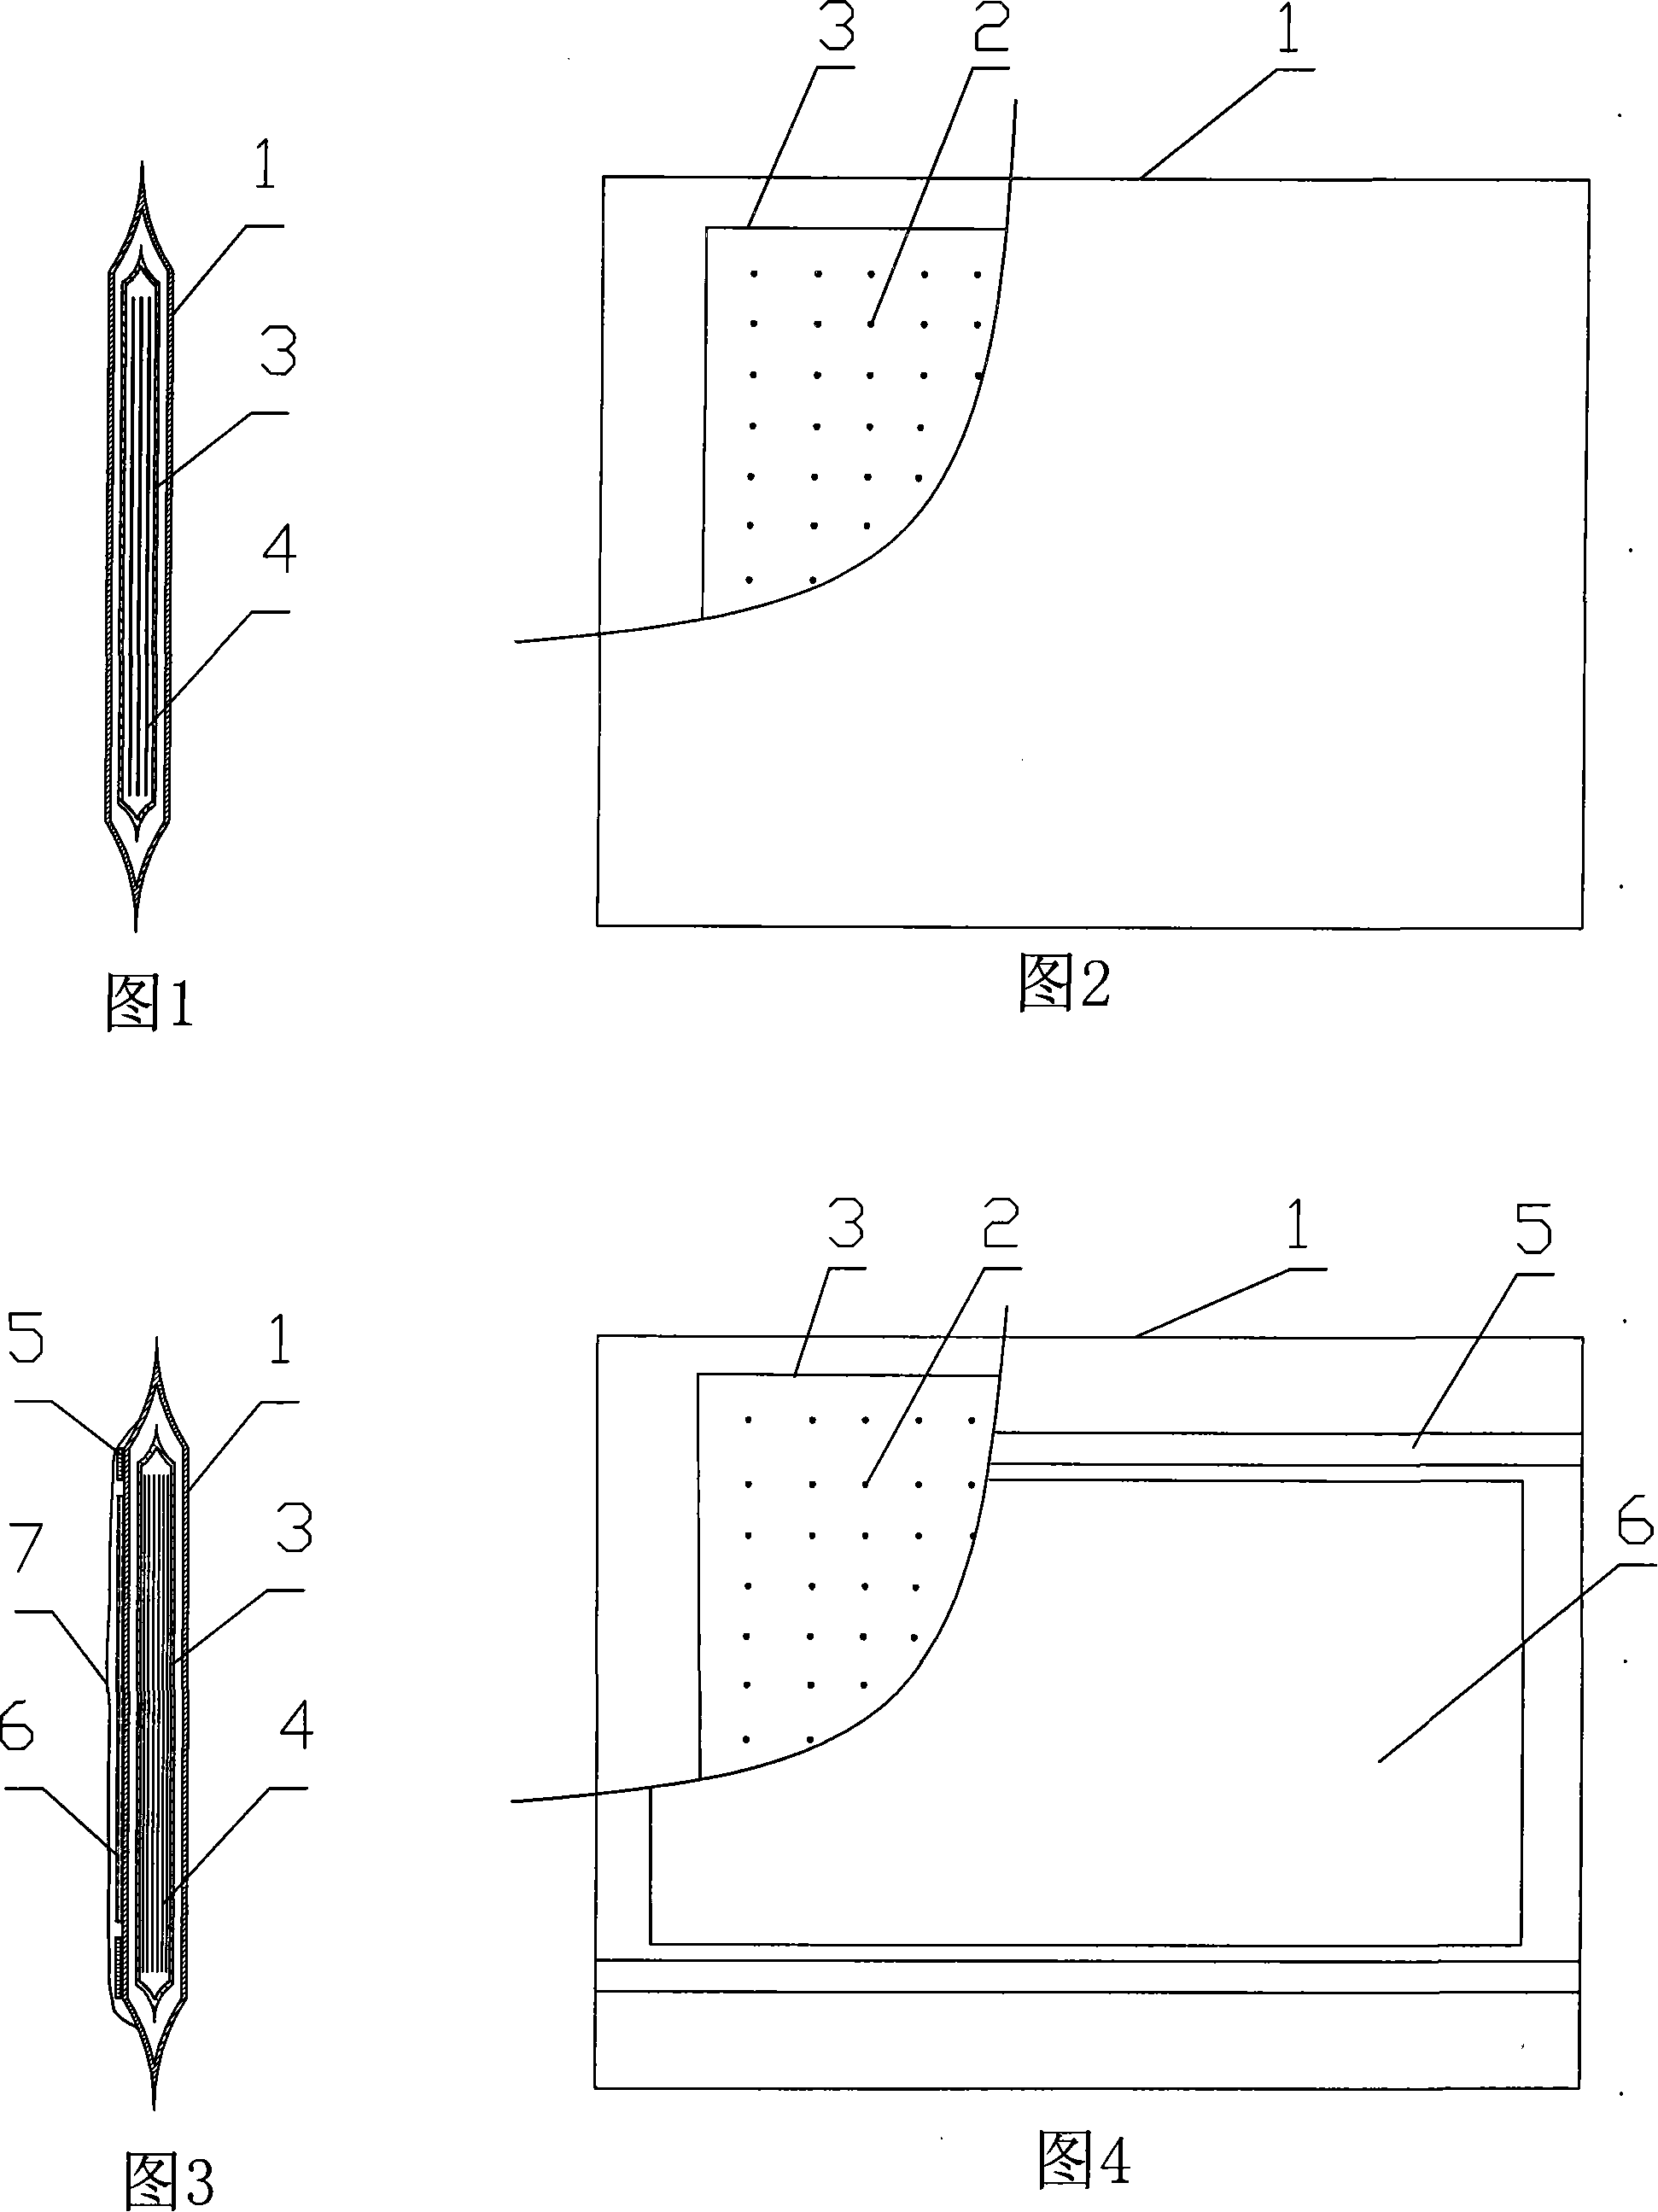 Spontaneous heating thermal bag and method of manufacturing the same